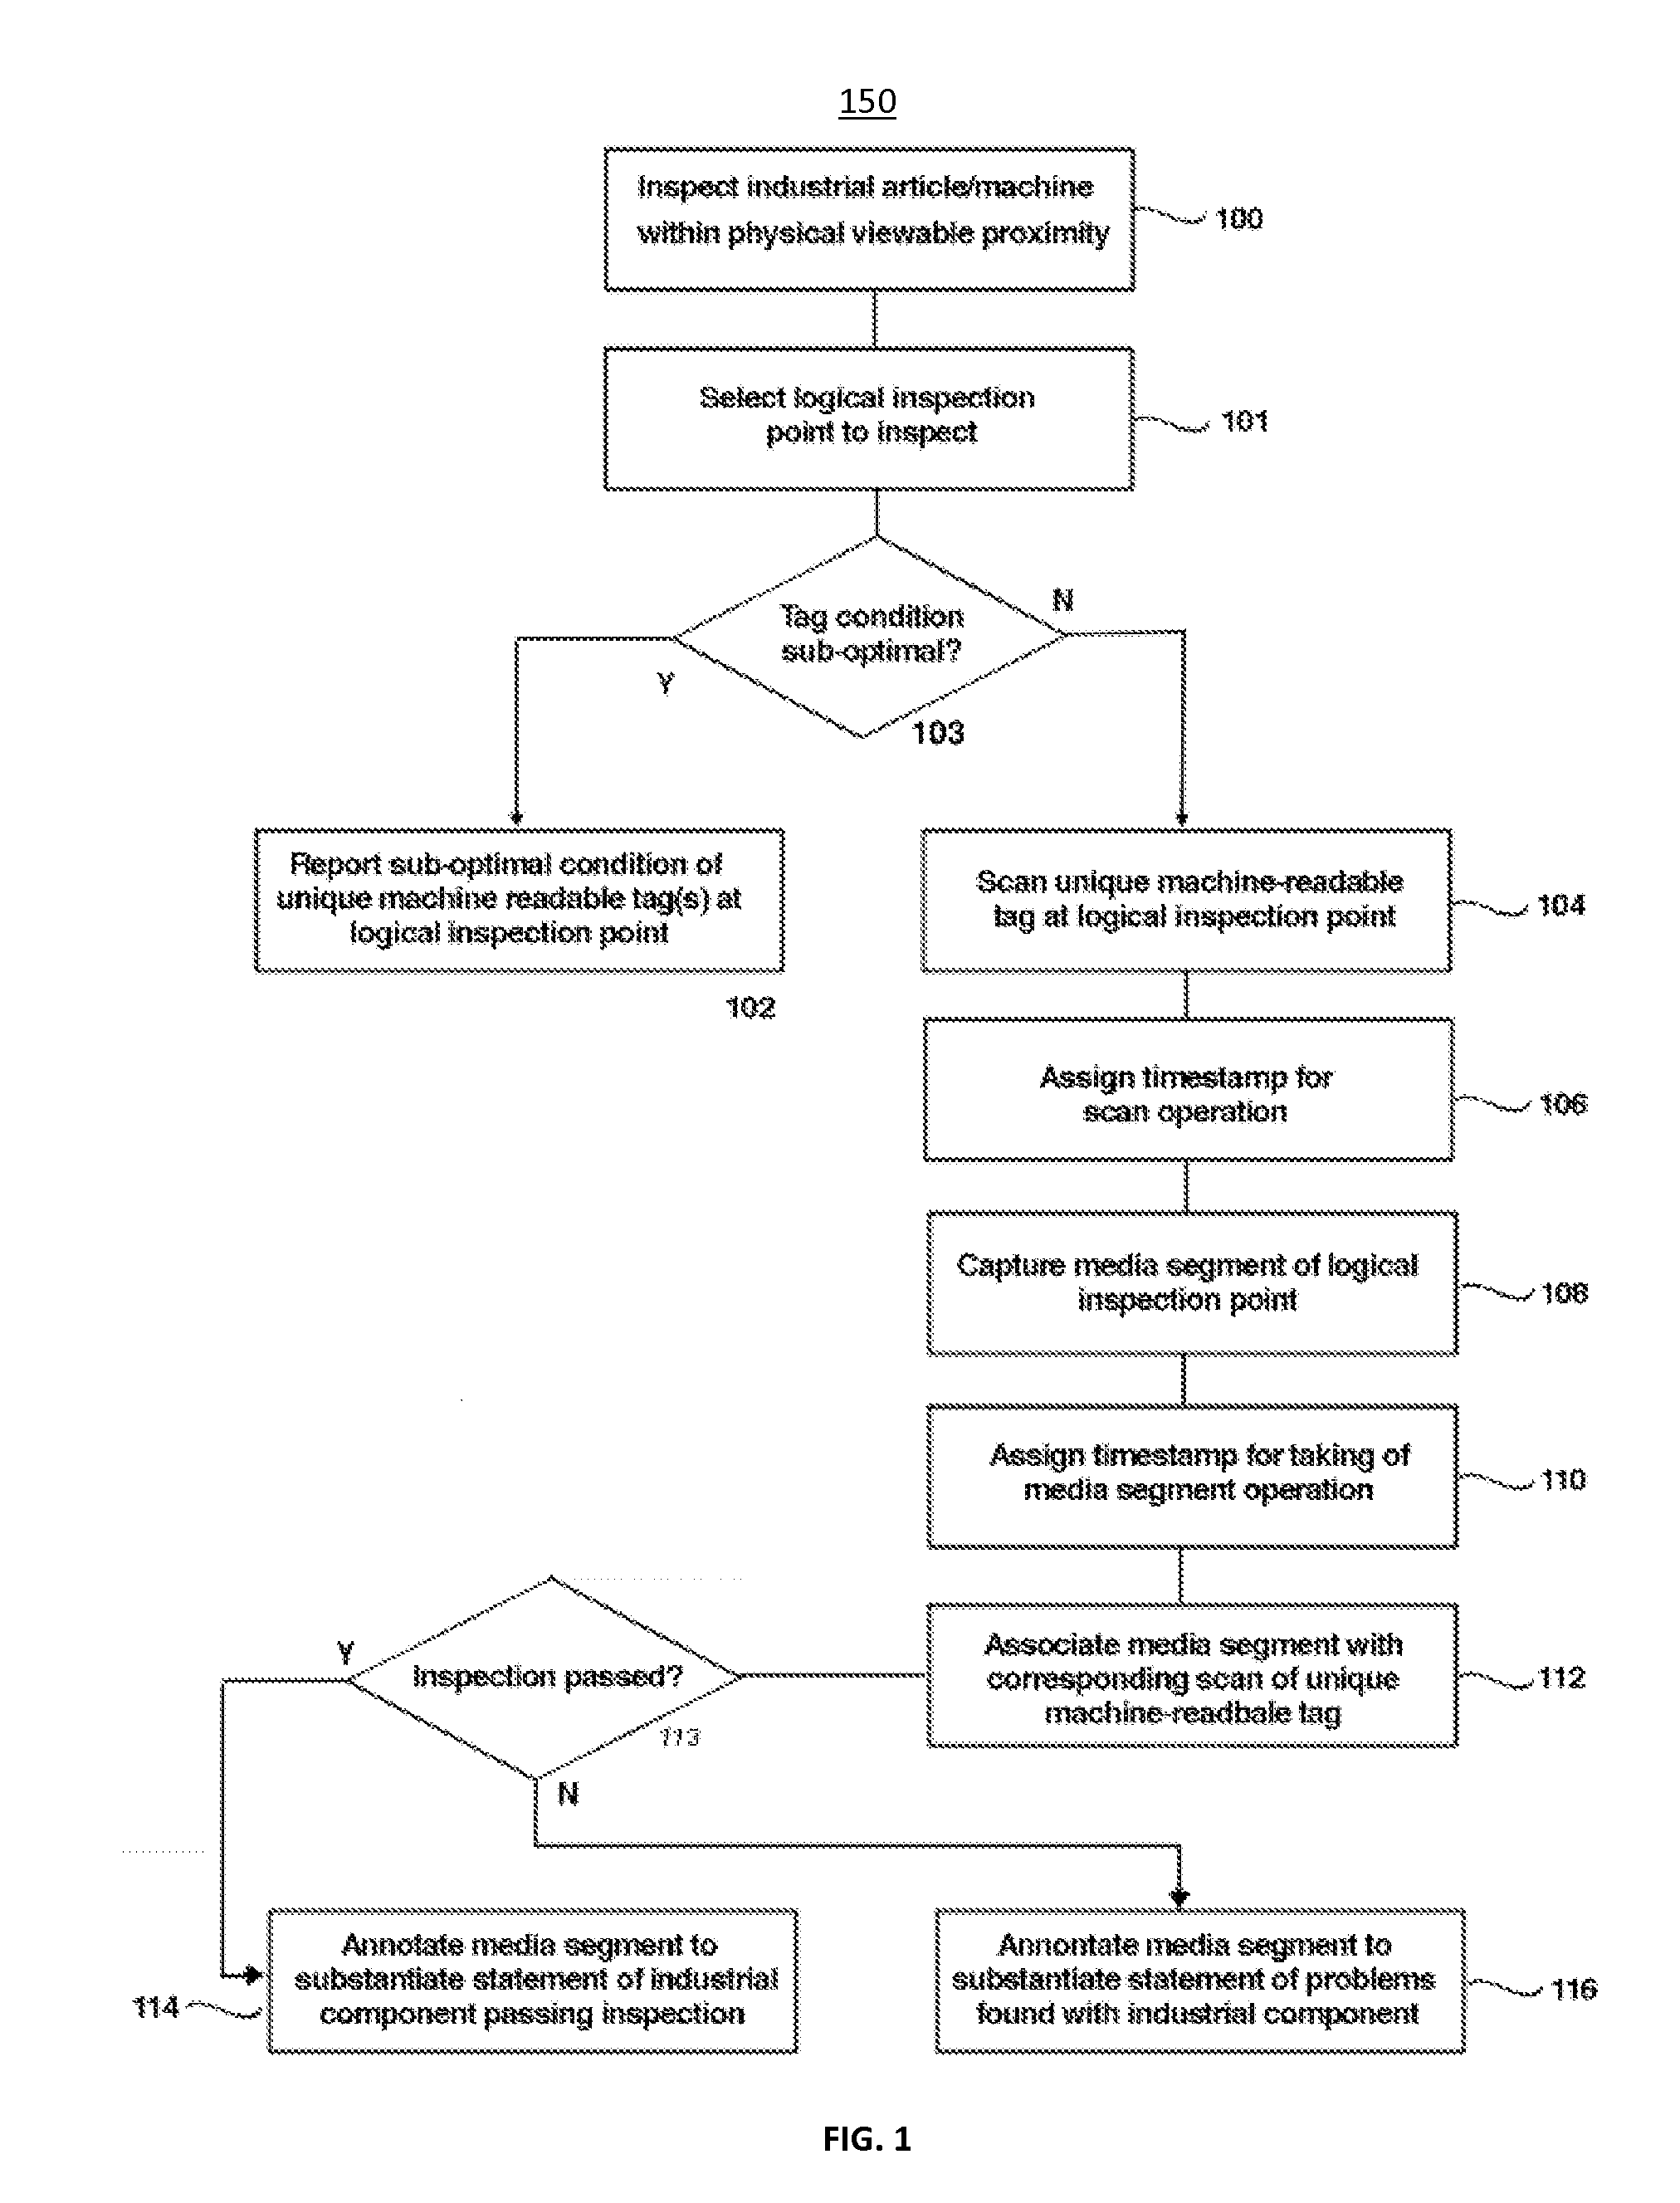 System and method for carrying out an inspection or maintenance operation with compliance tracking using a handheld device